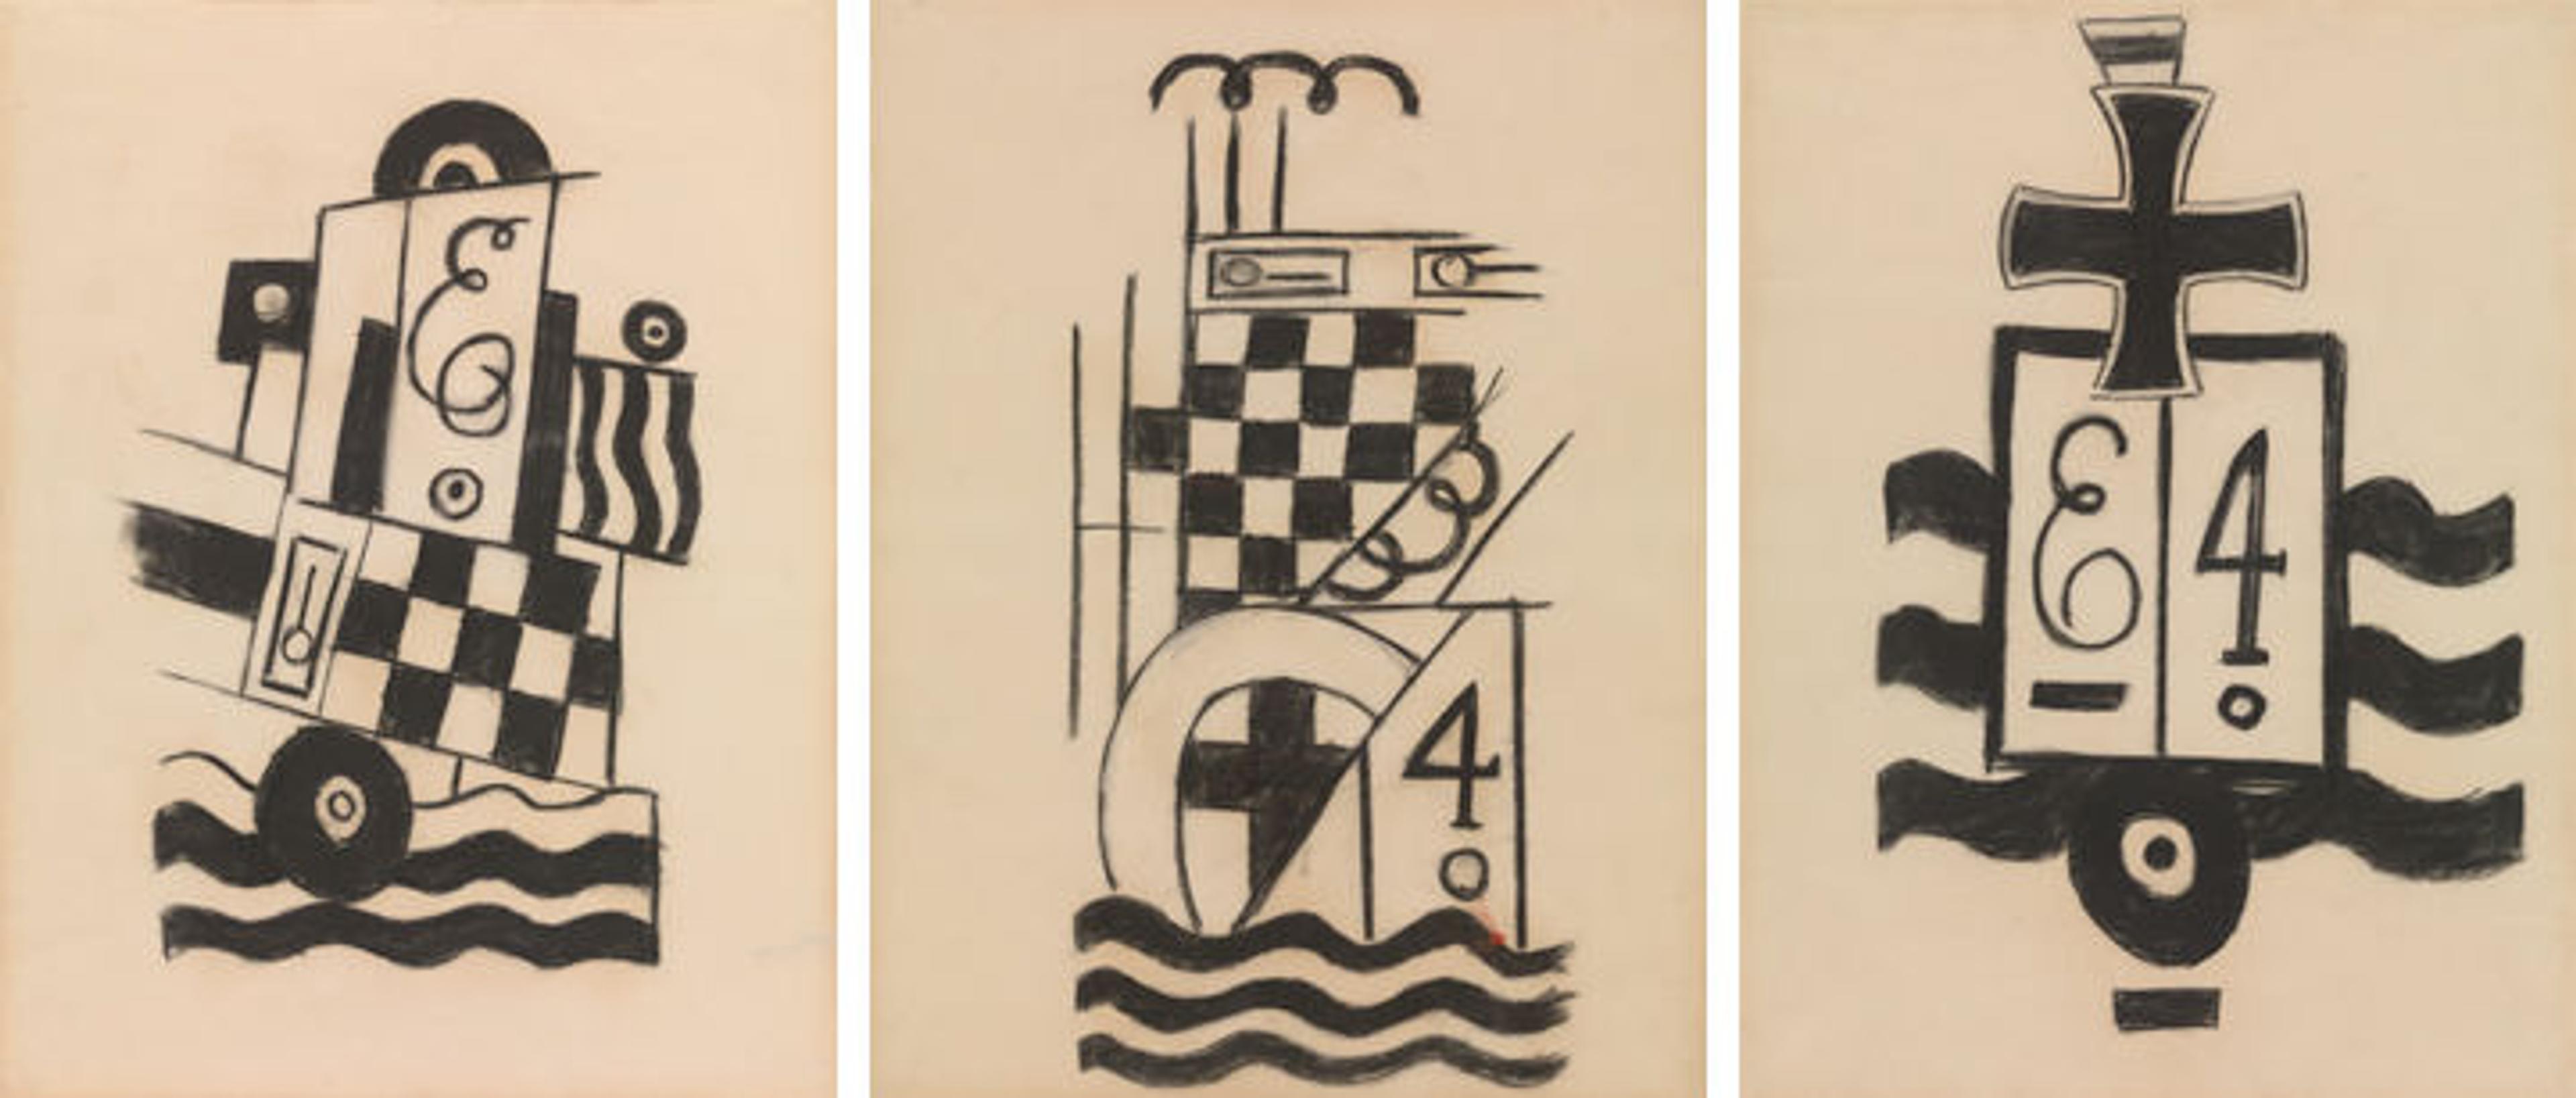 Three different charcoal drawings of military symbols by Marsden Hartley